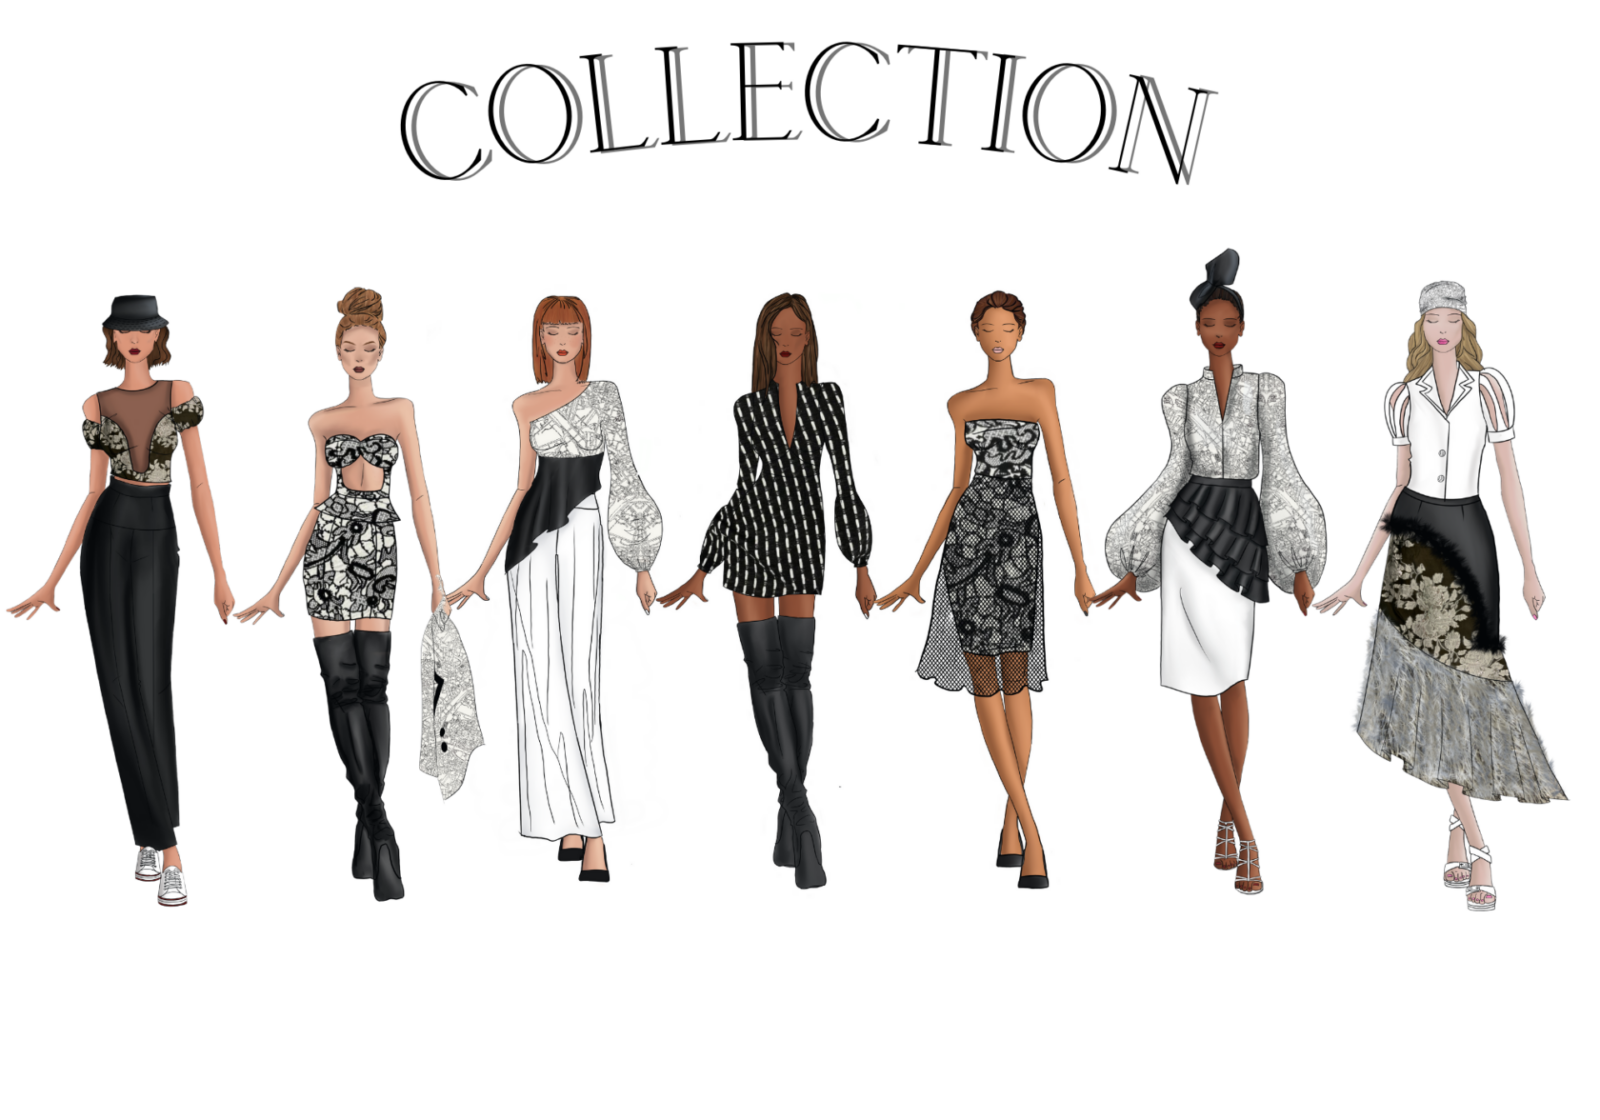 Illustrated Collection - 17 garments, 7 looks